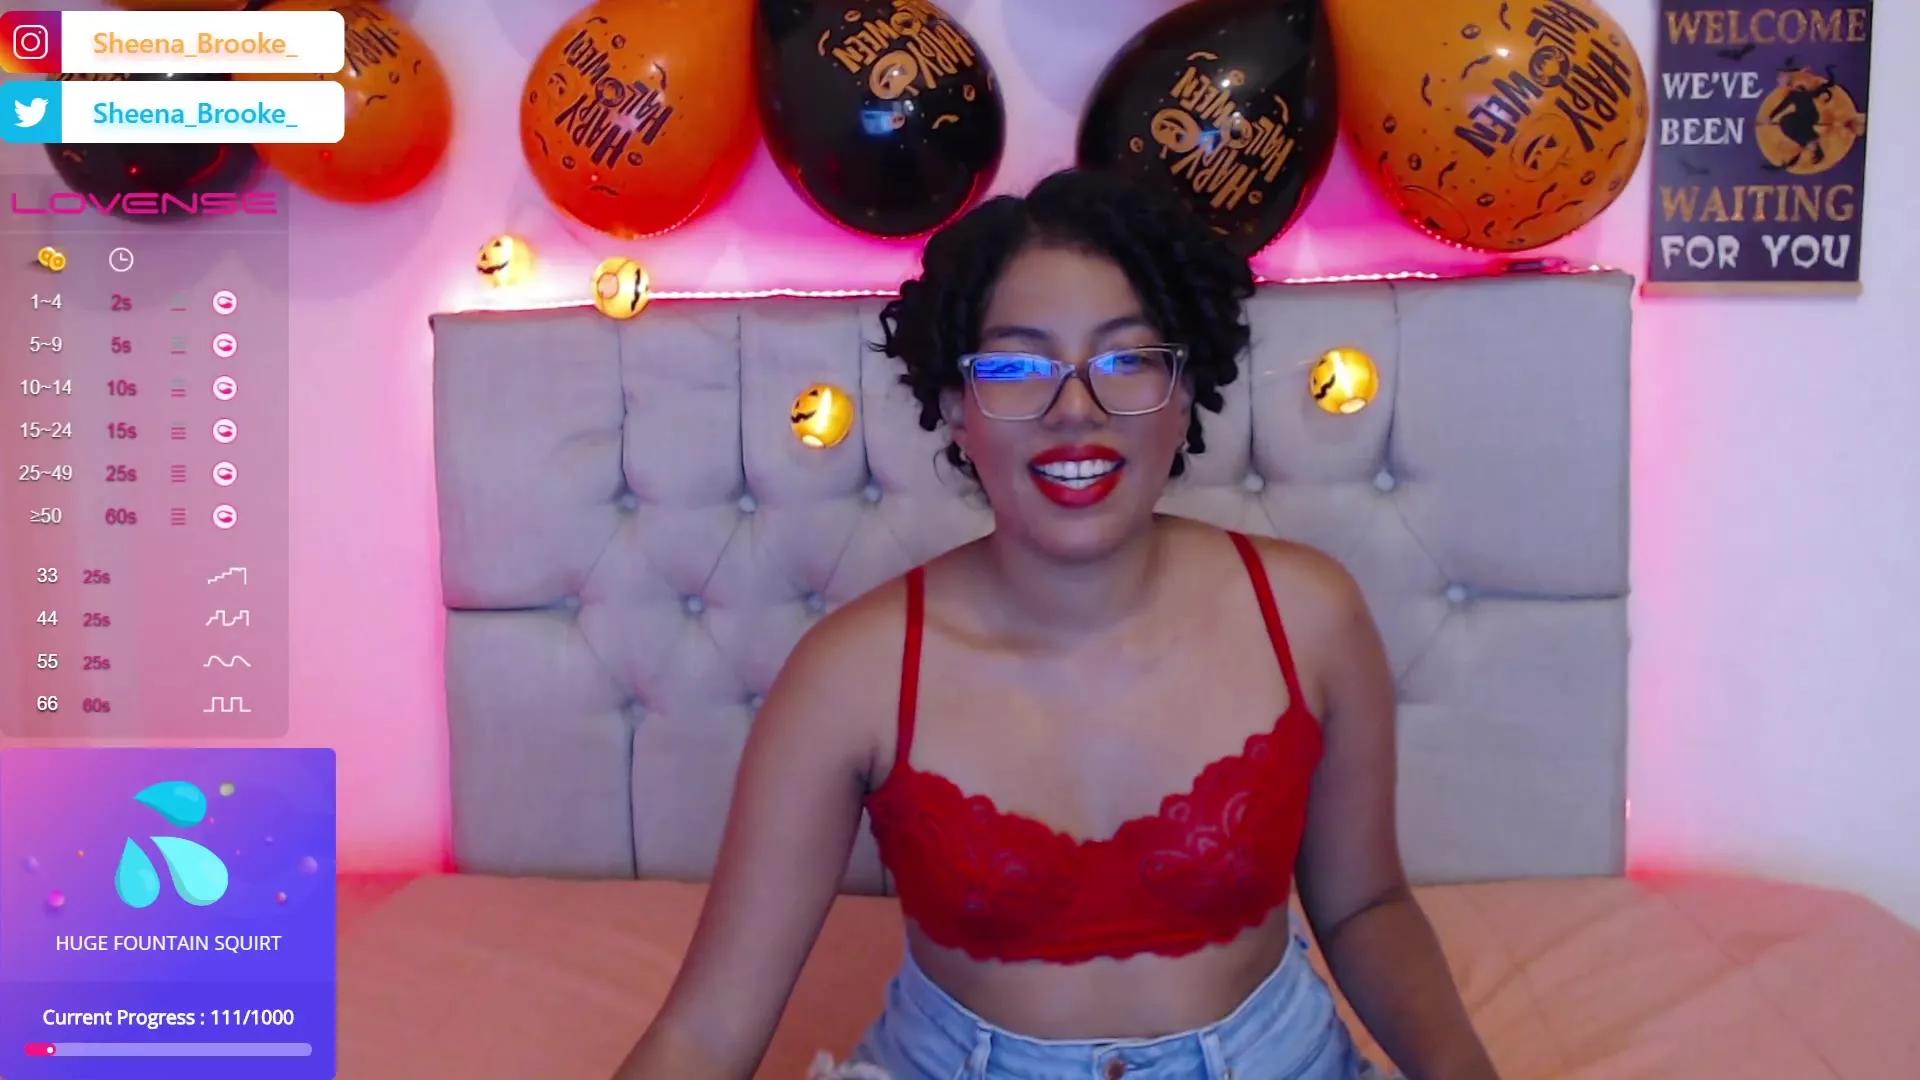 Incite your fixations: Get slutty and flatter these stunning fingering livestreamers, who will reward you with bonkers garments and vibrating toys.